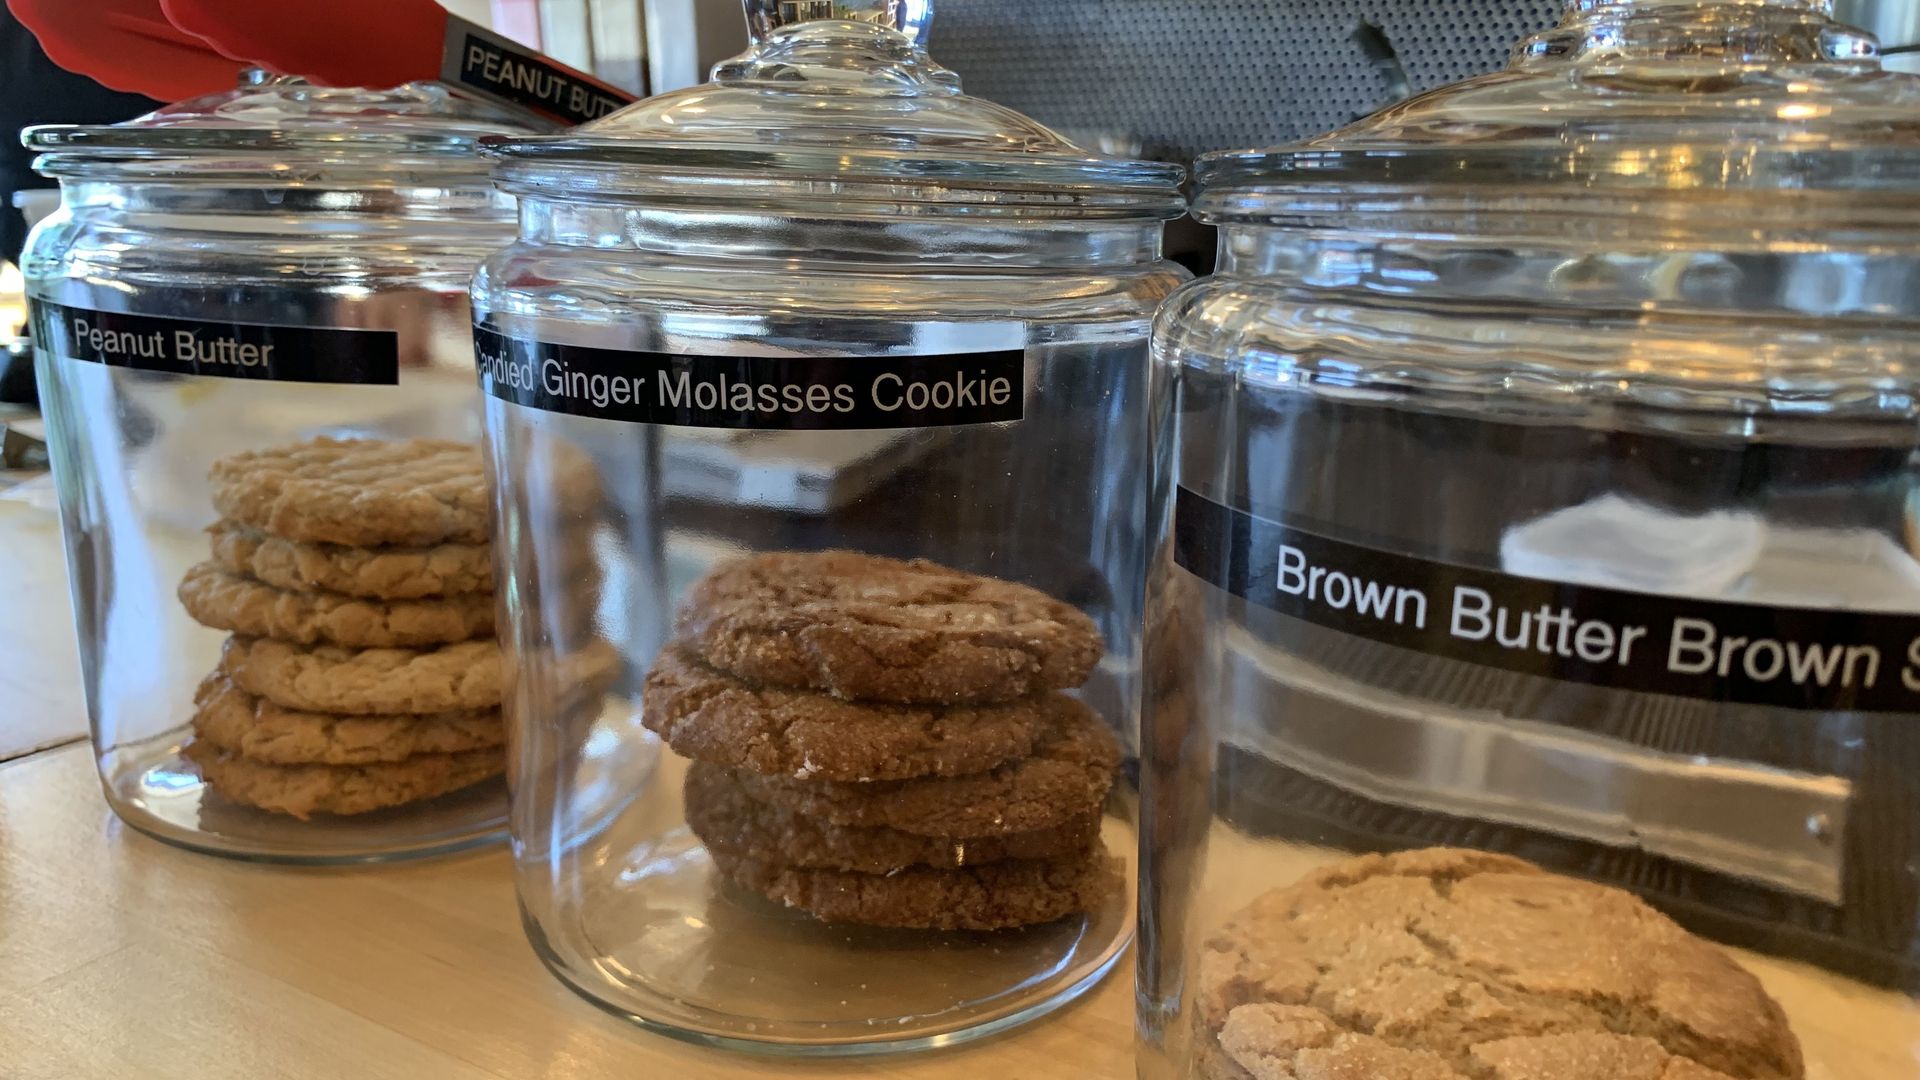 Three jars of different flavors of cookies.